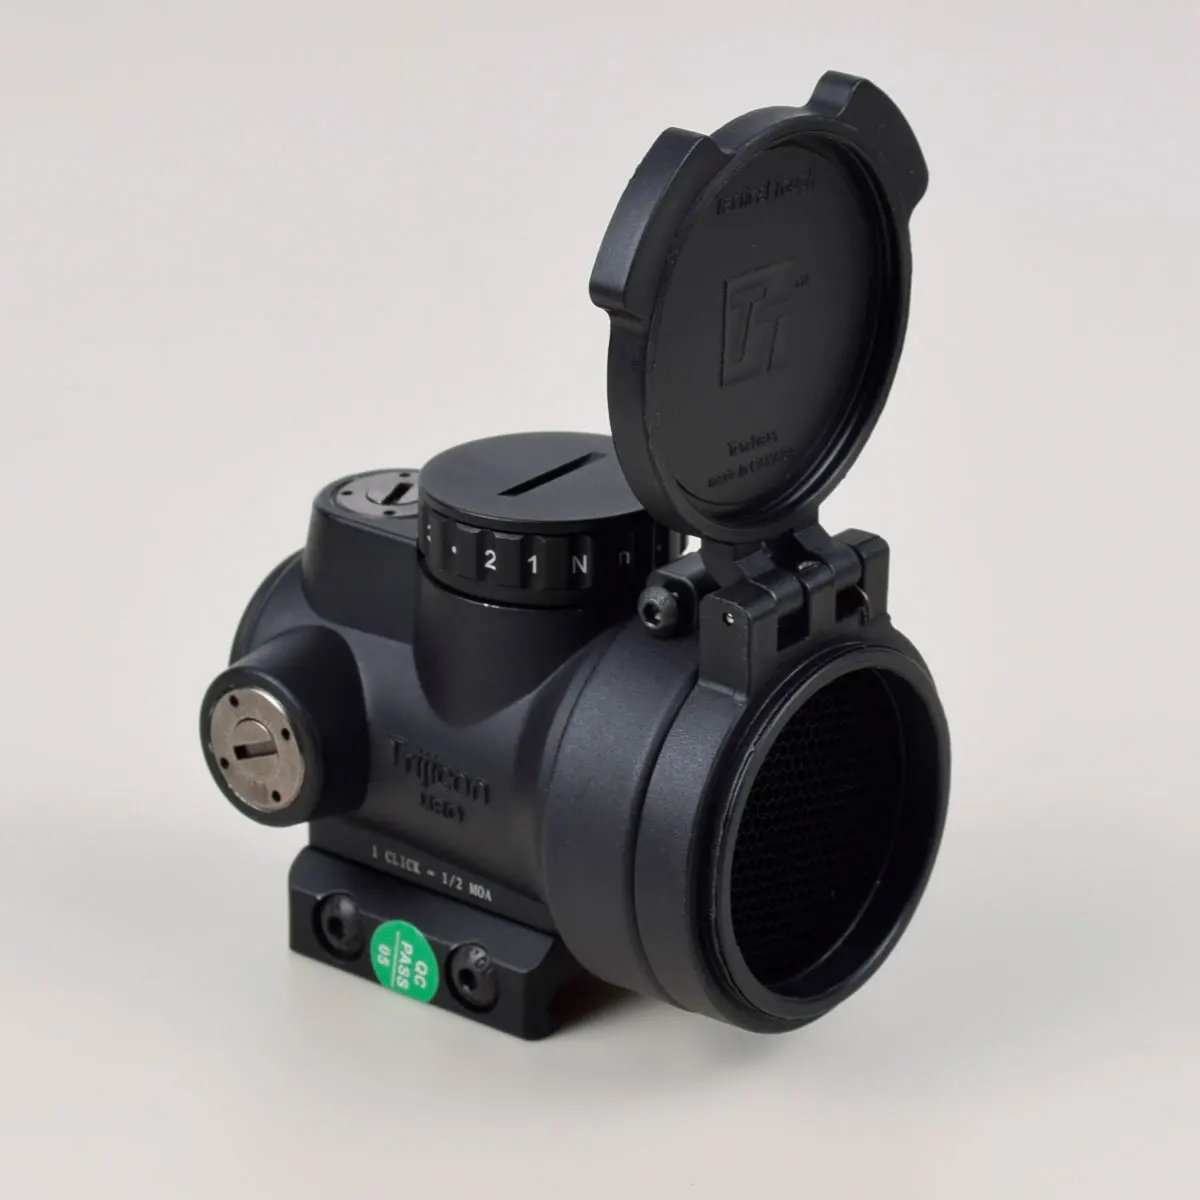 

High Quality Tactical 2 MOA Trijicon MRO Red Dot Sight with QD Riser Mount and Killflash fit 20mm Rail for HK416 AR15 AK47